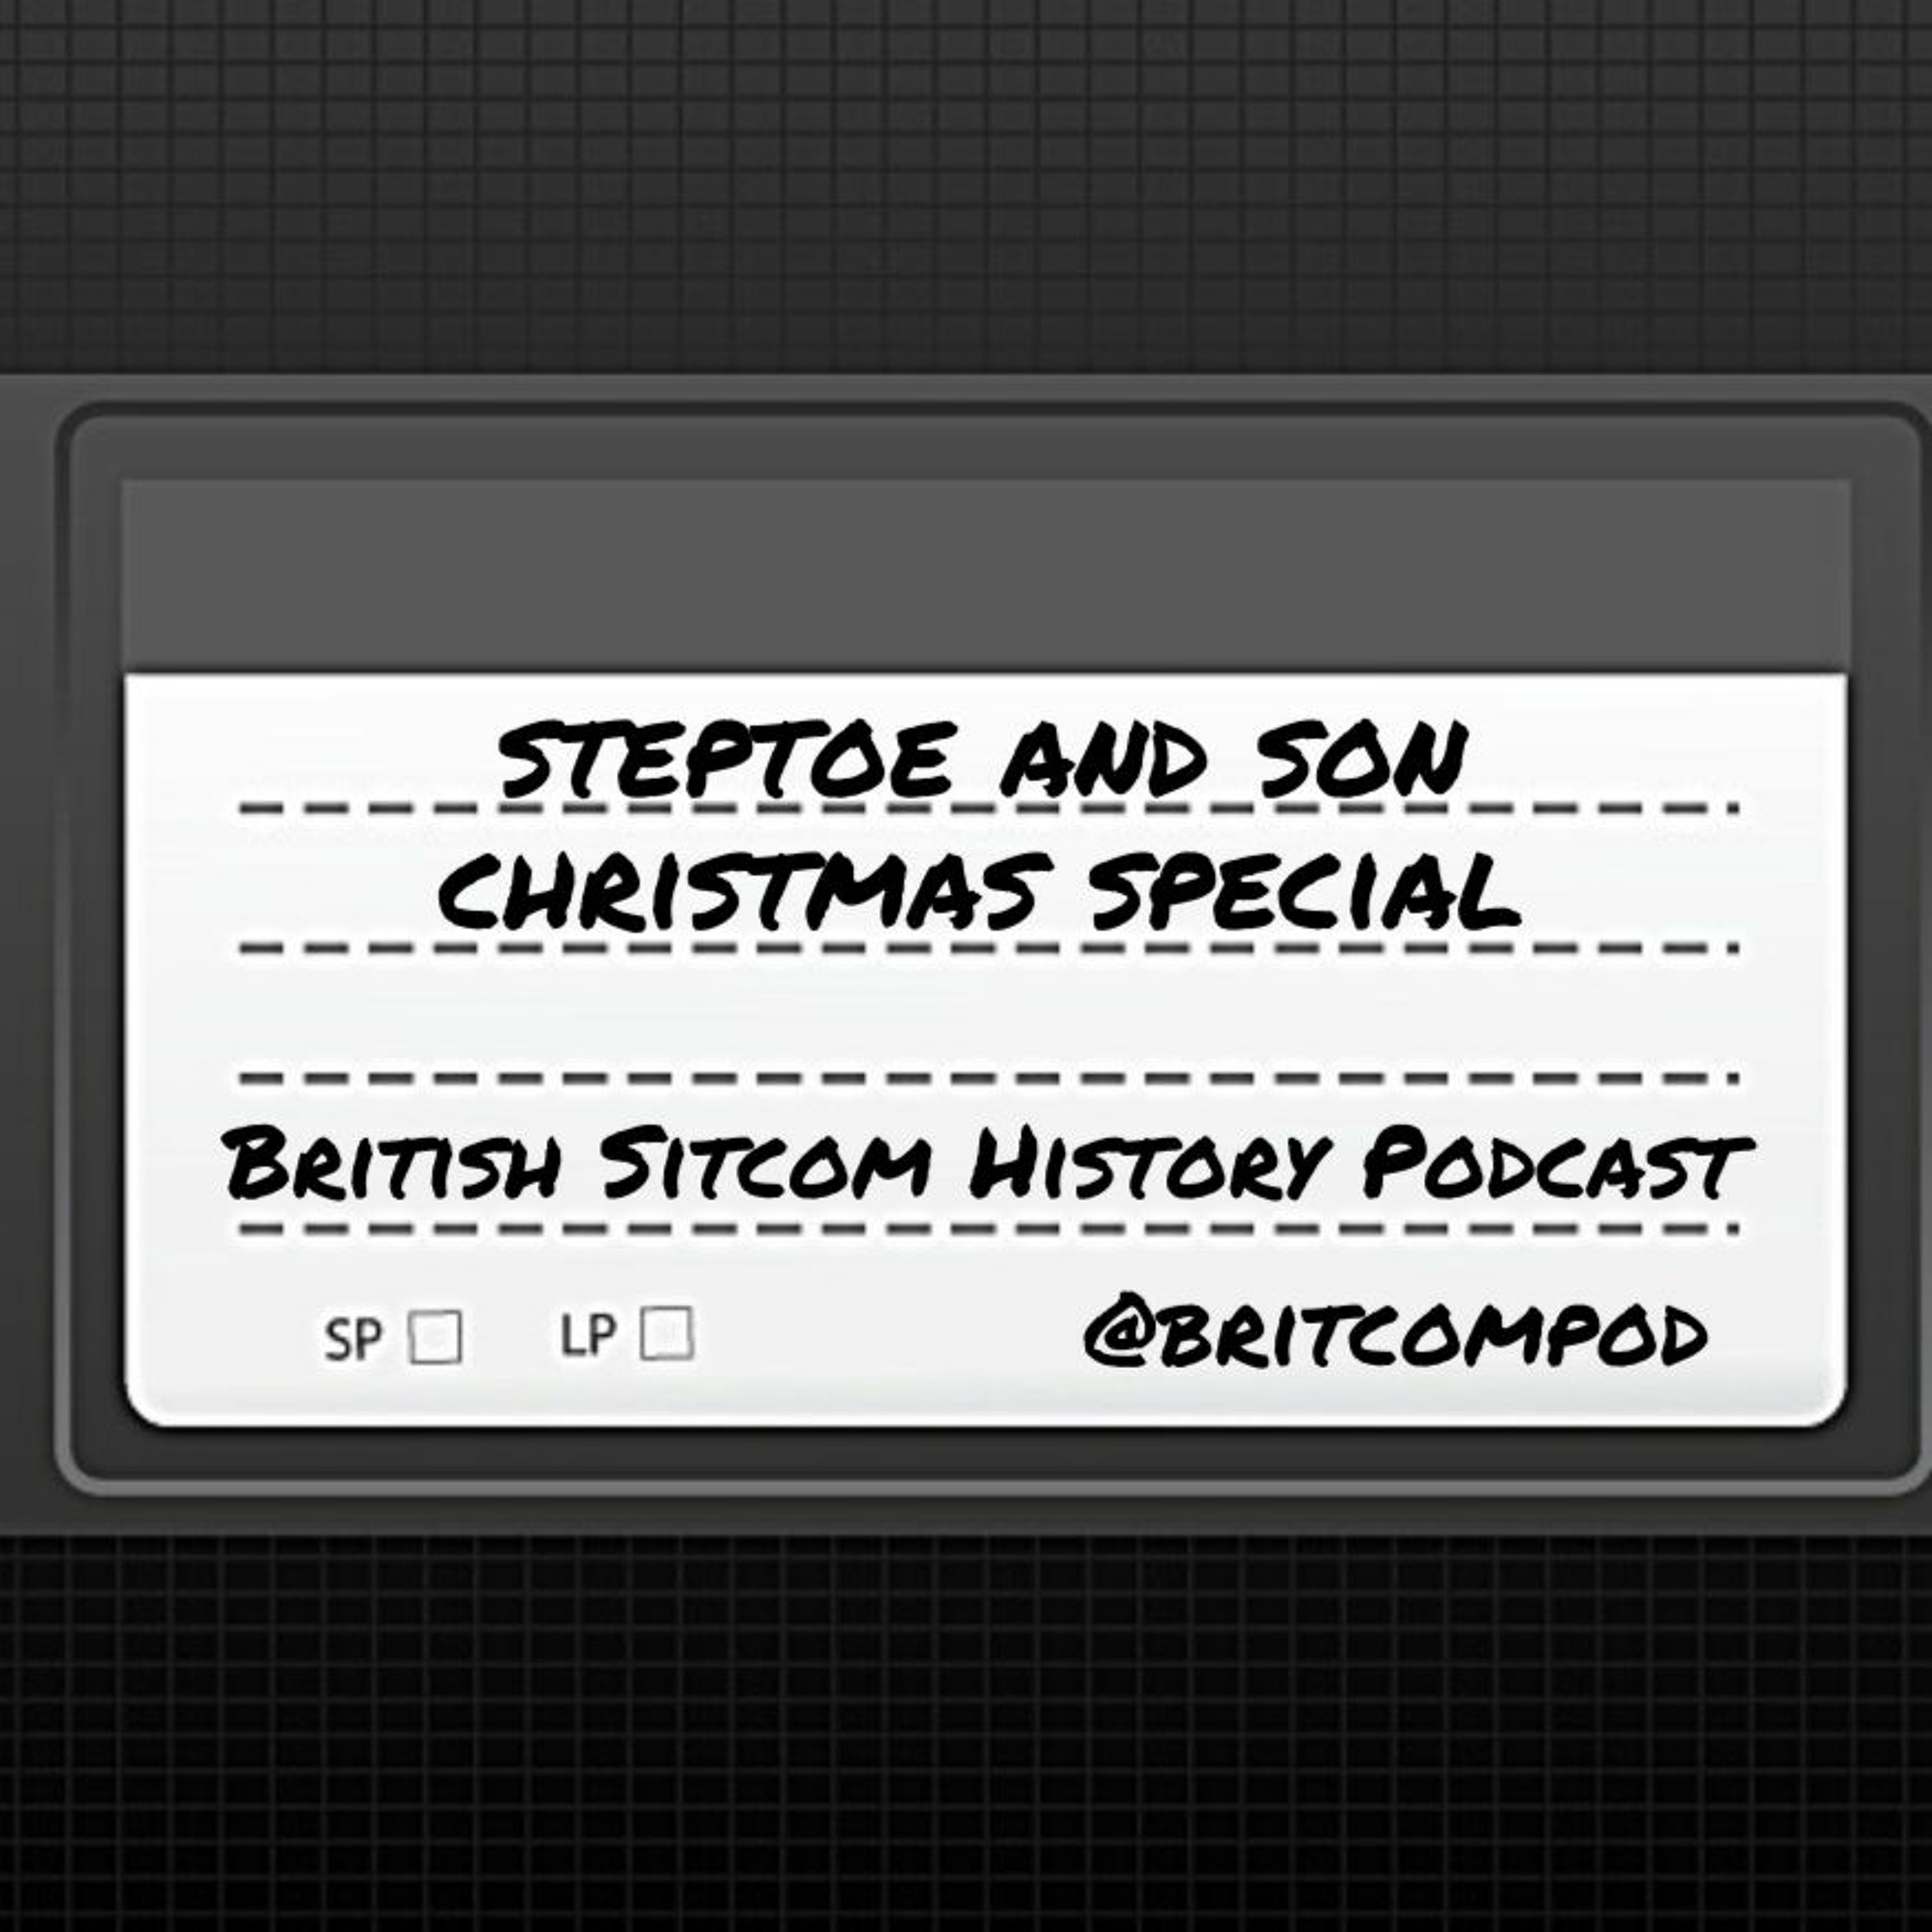 Steptoe and Son - Christmas Special